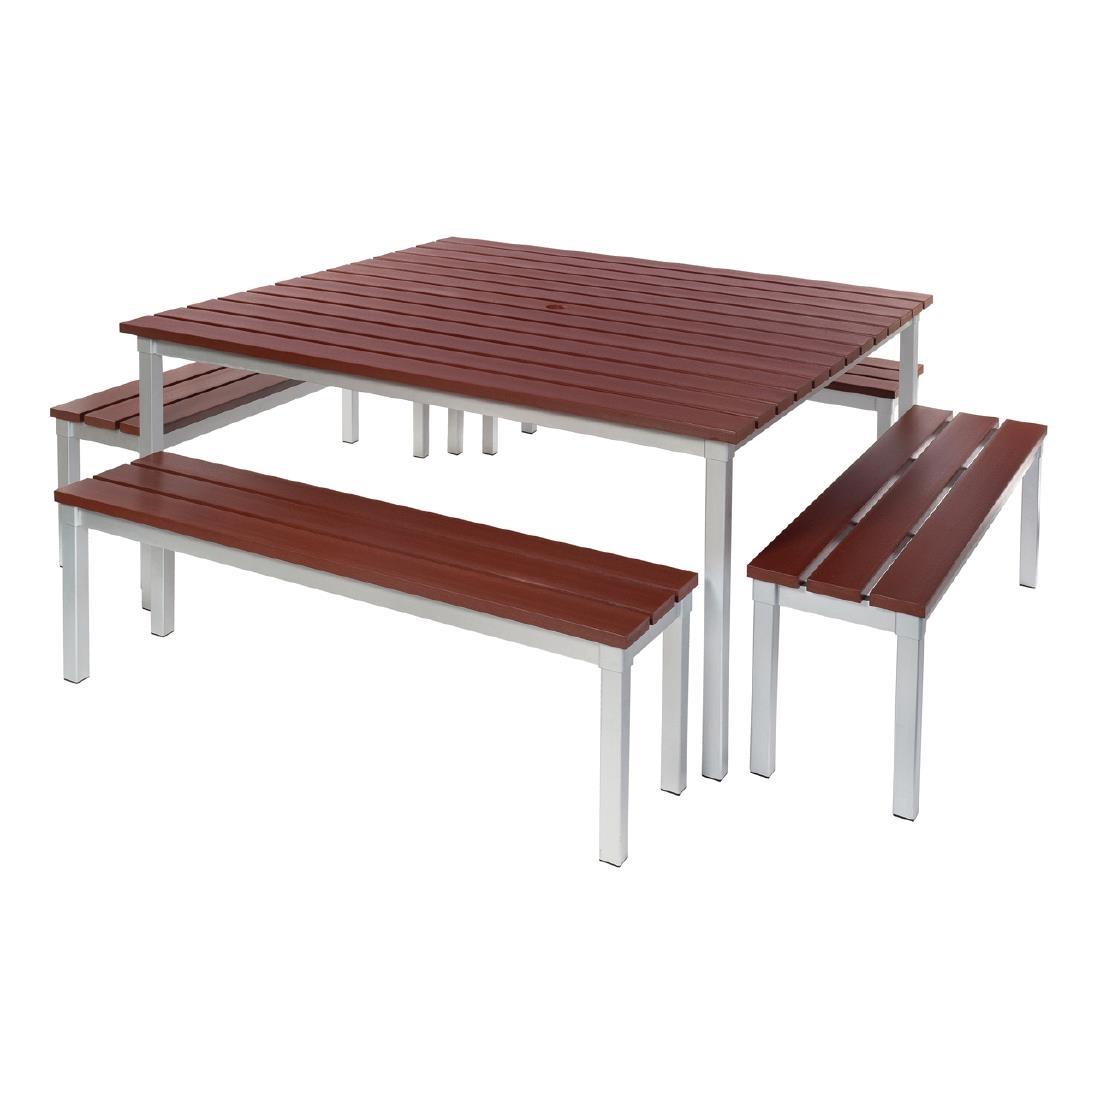 Enviro Square Outdoor Walnut Effect Faux Wood Table 1250mm - CK811  - 2